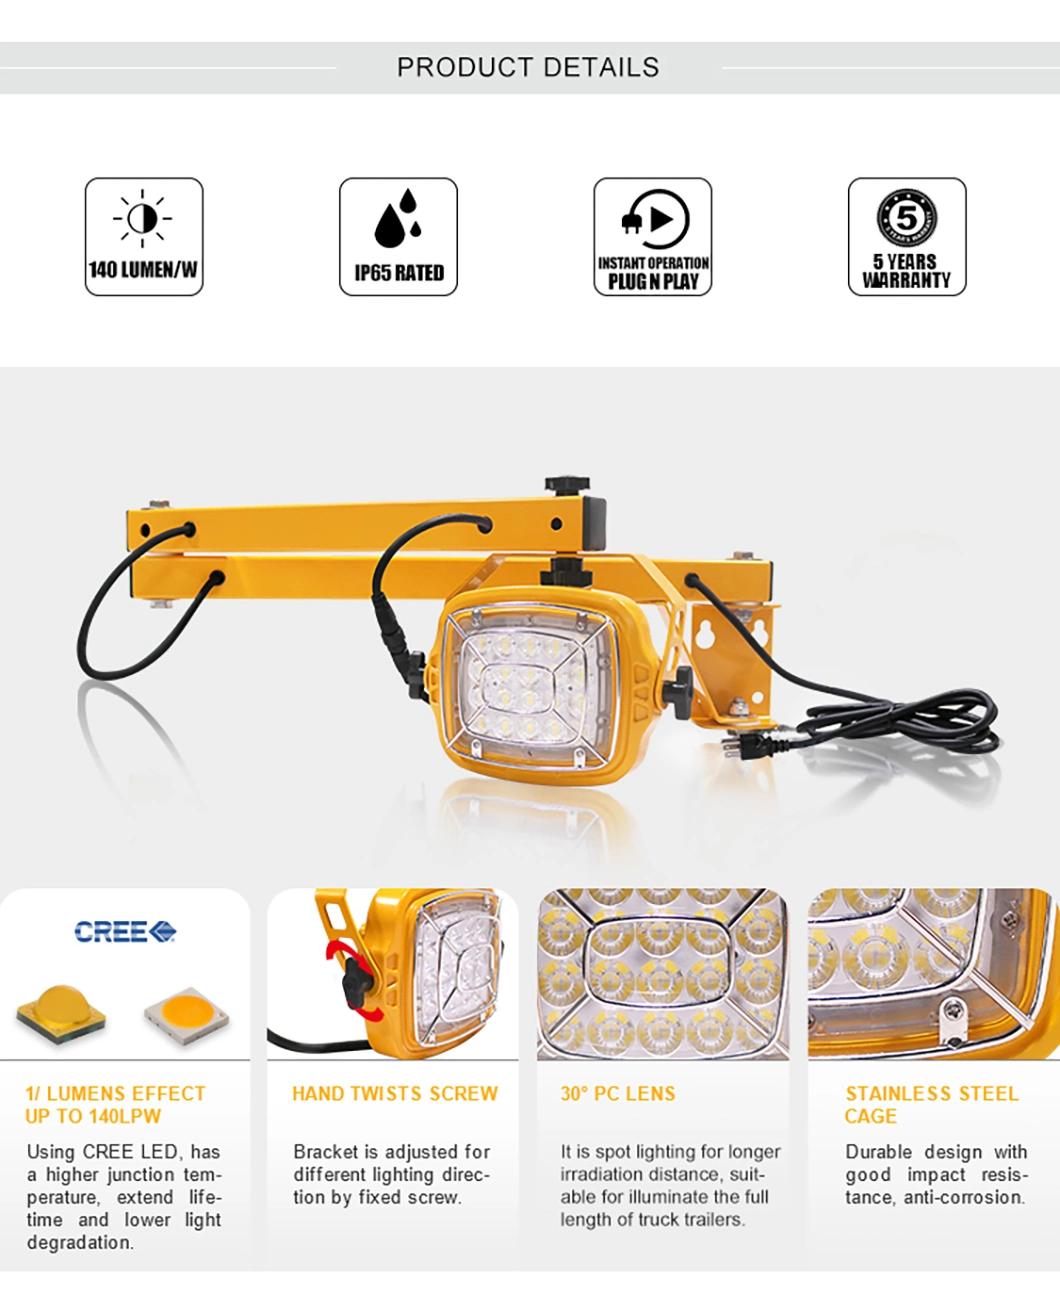 Approved LED Loading Dock Light Bay Light 50W with Flexible Arm Waterproof Loading Lamp